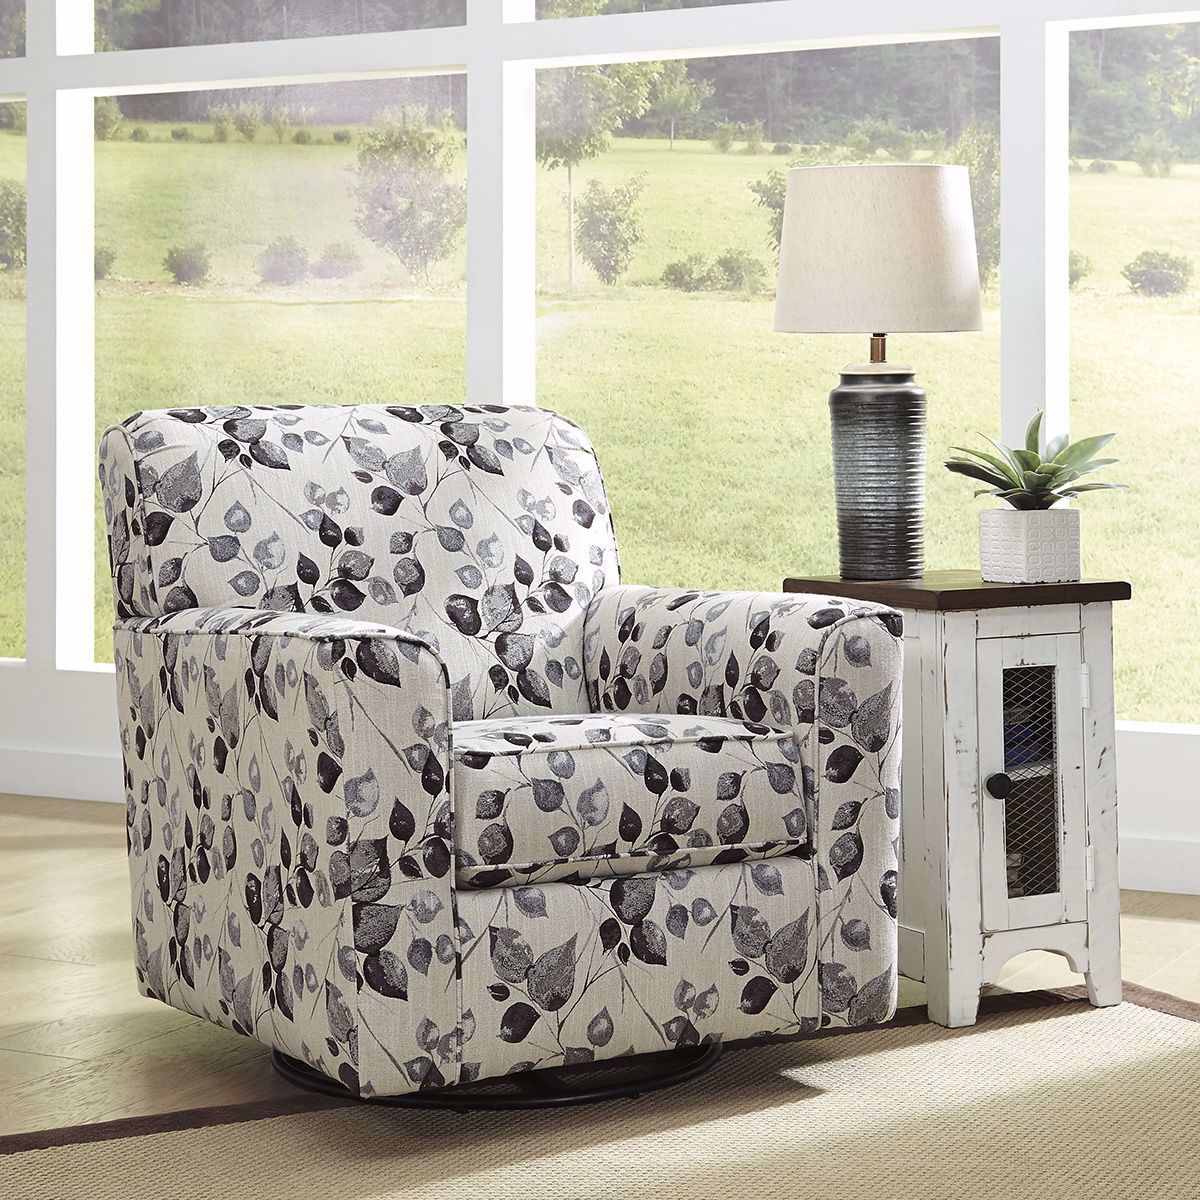 Picture of Annabell Swivel Chair